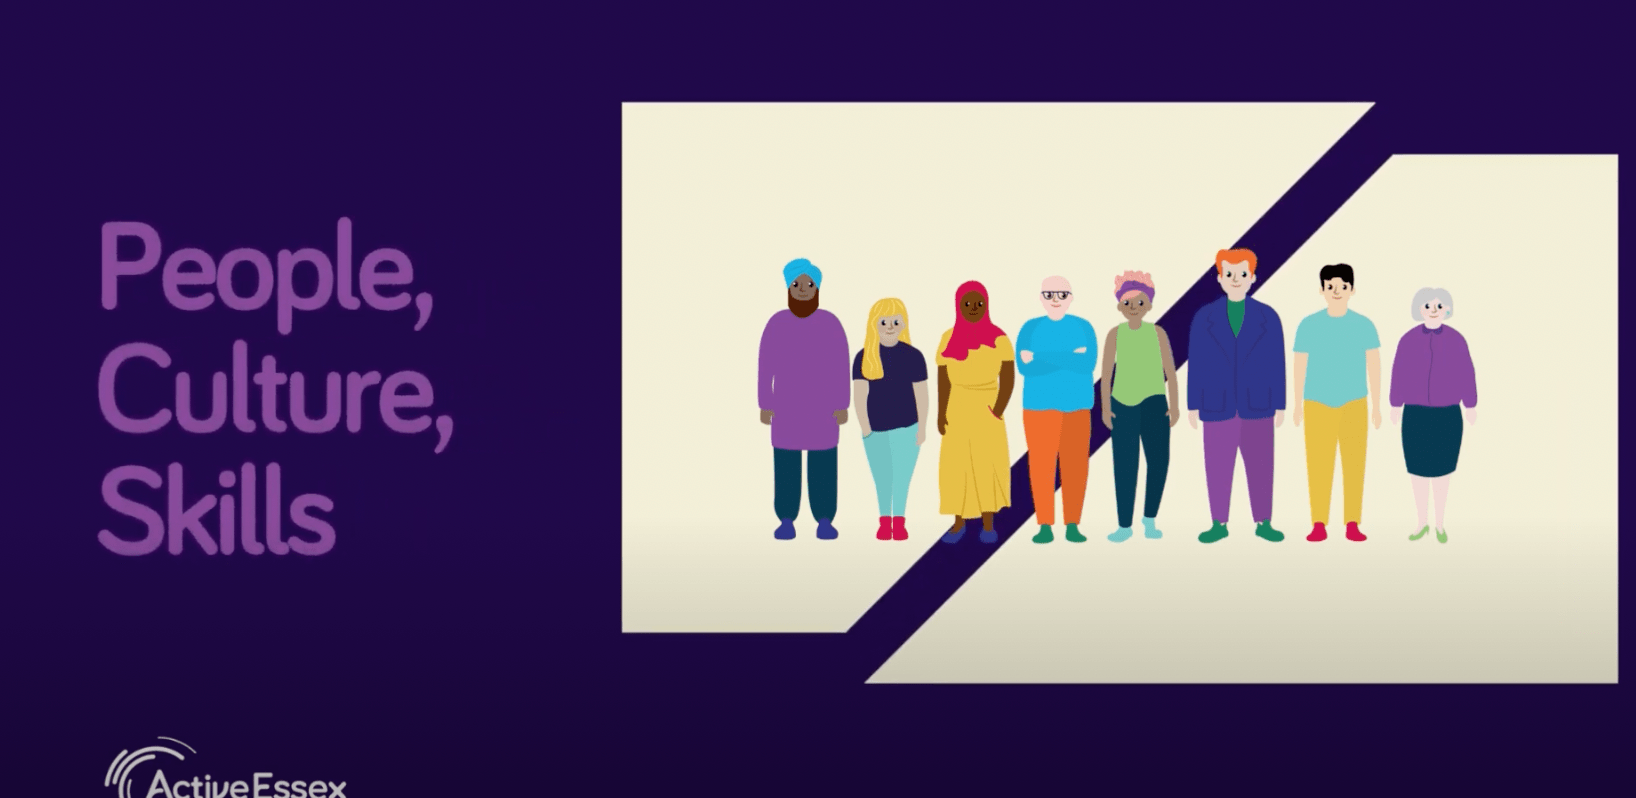 purple background with animated images of different people. 